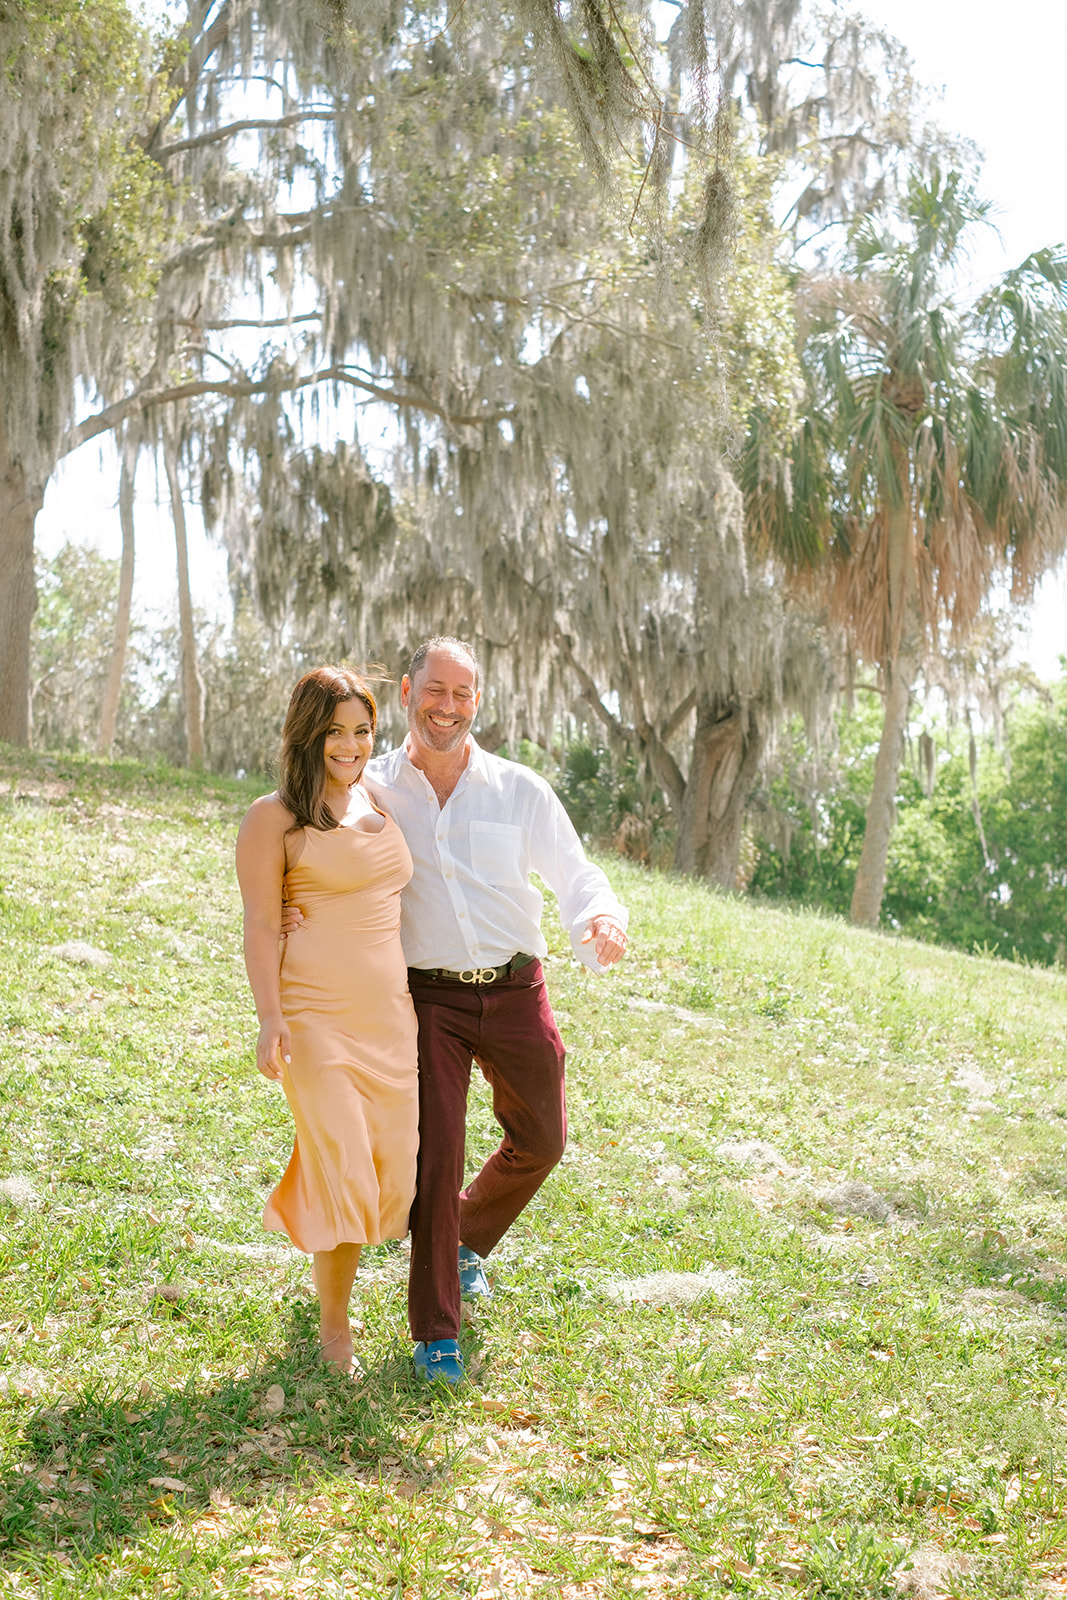 Intimate Tampa Engagement Portraits
